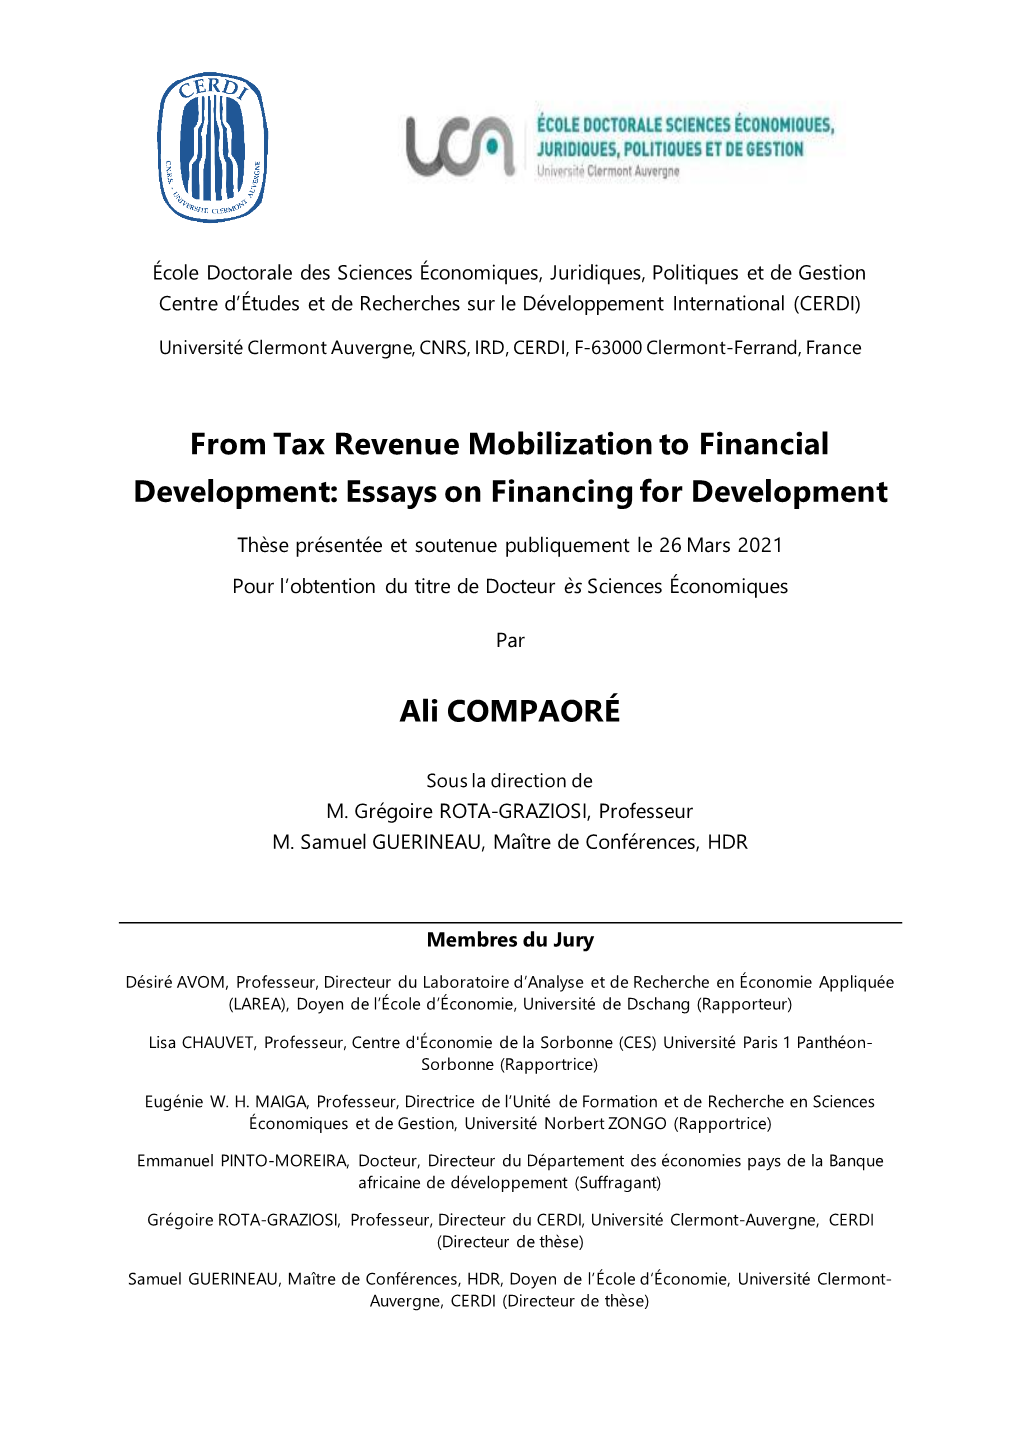 From Tax Revenue Mobilization to Financial Development: Essays on Financing for Development